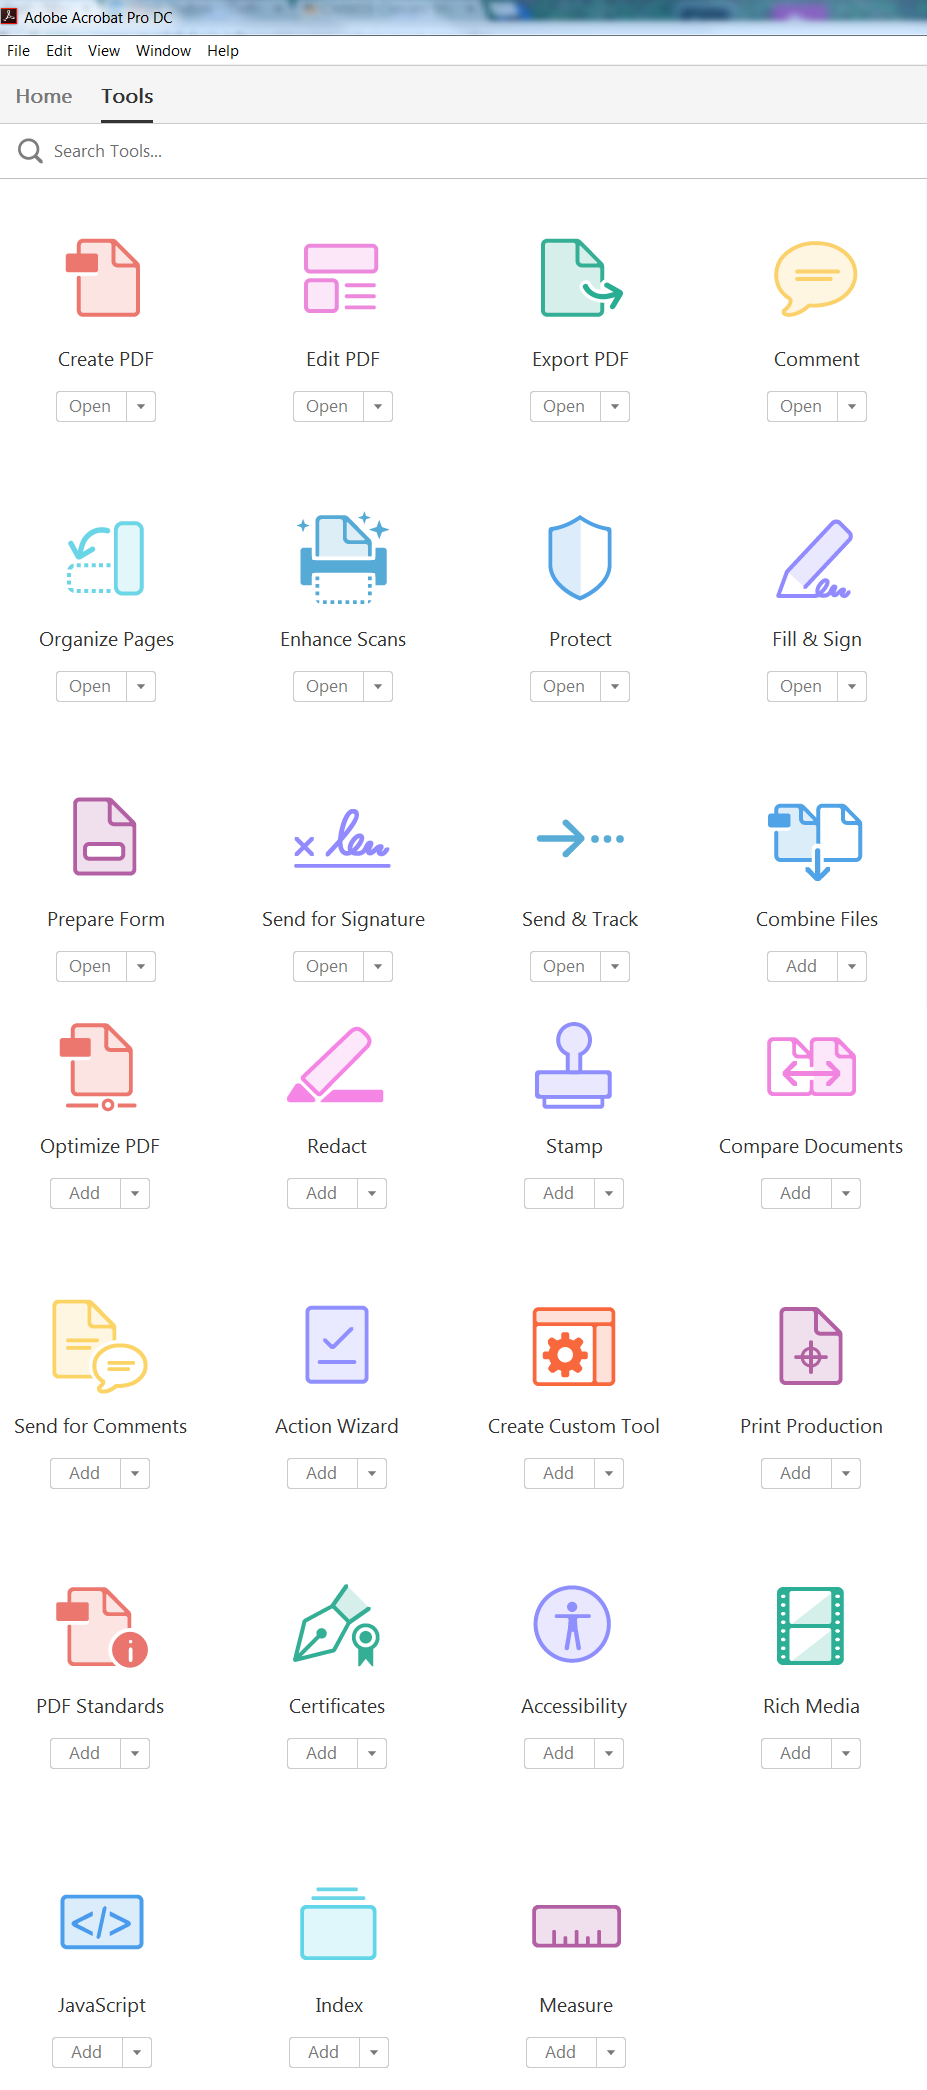 Overview of available tools in Acrobat DC